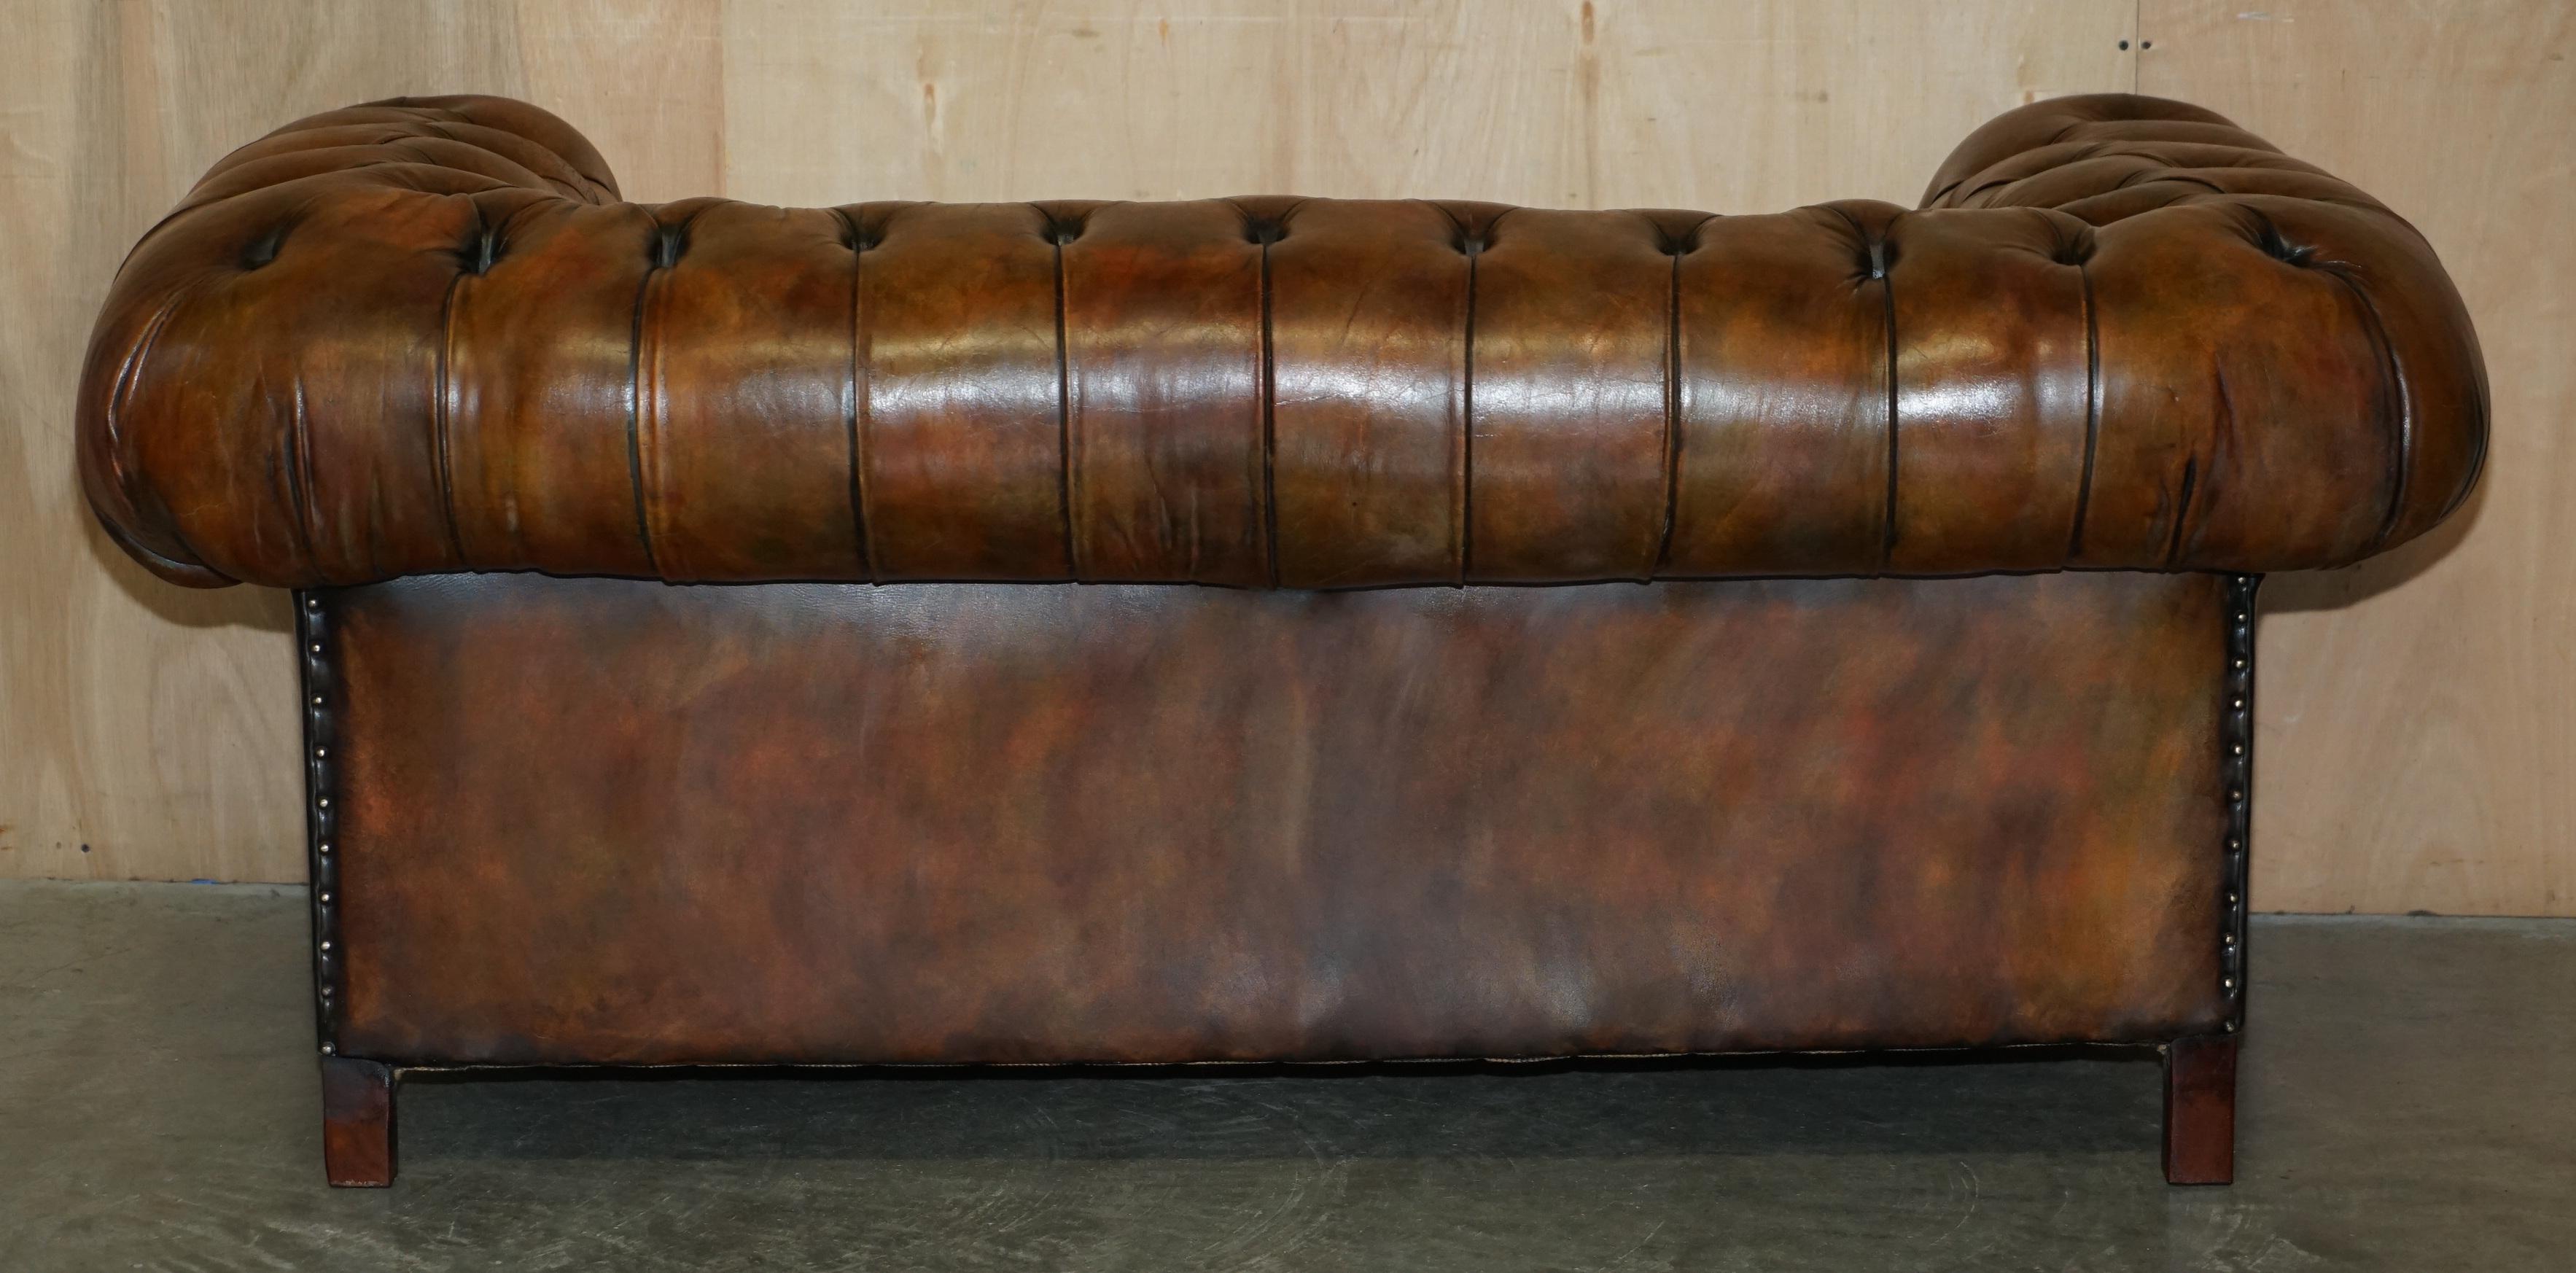 RESTORED VICTORiAN 1890 EXTRA LARGE ARMED CHESTERFIELD BROWN LEATHER CLUB SOFA For Sale 5